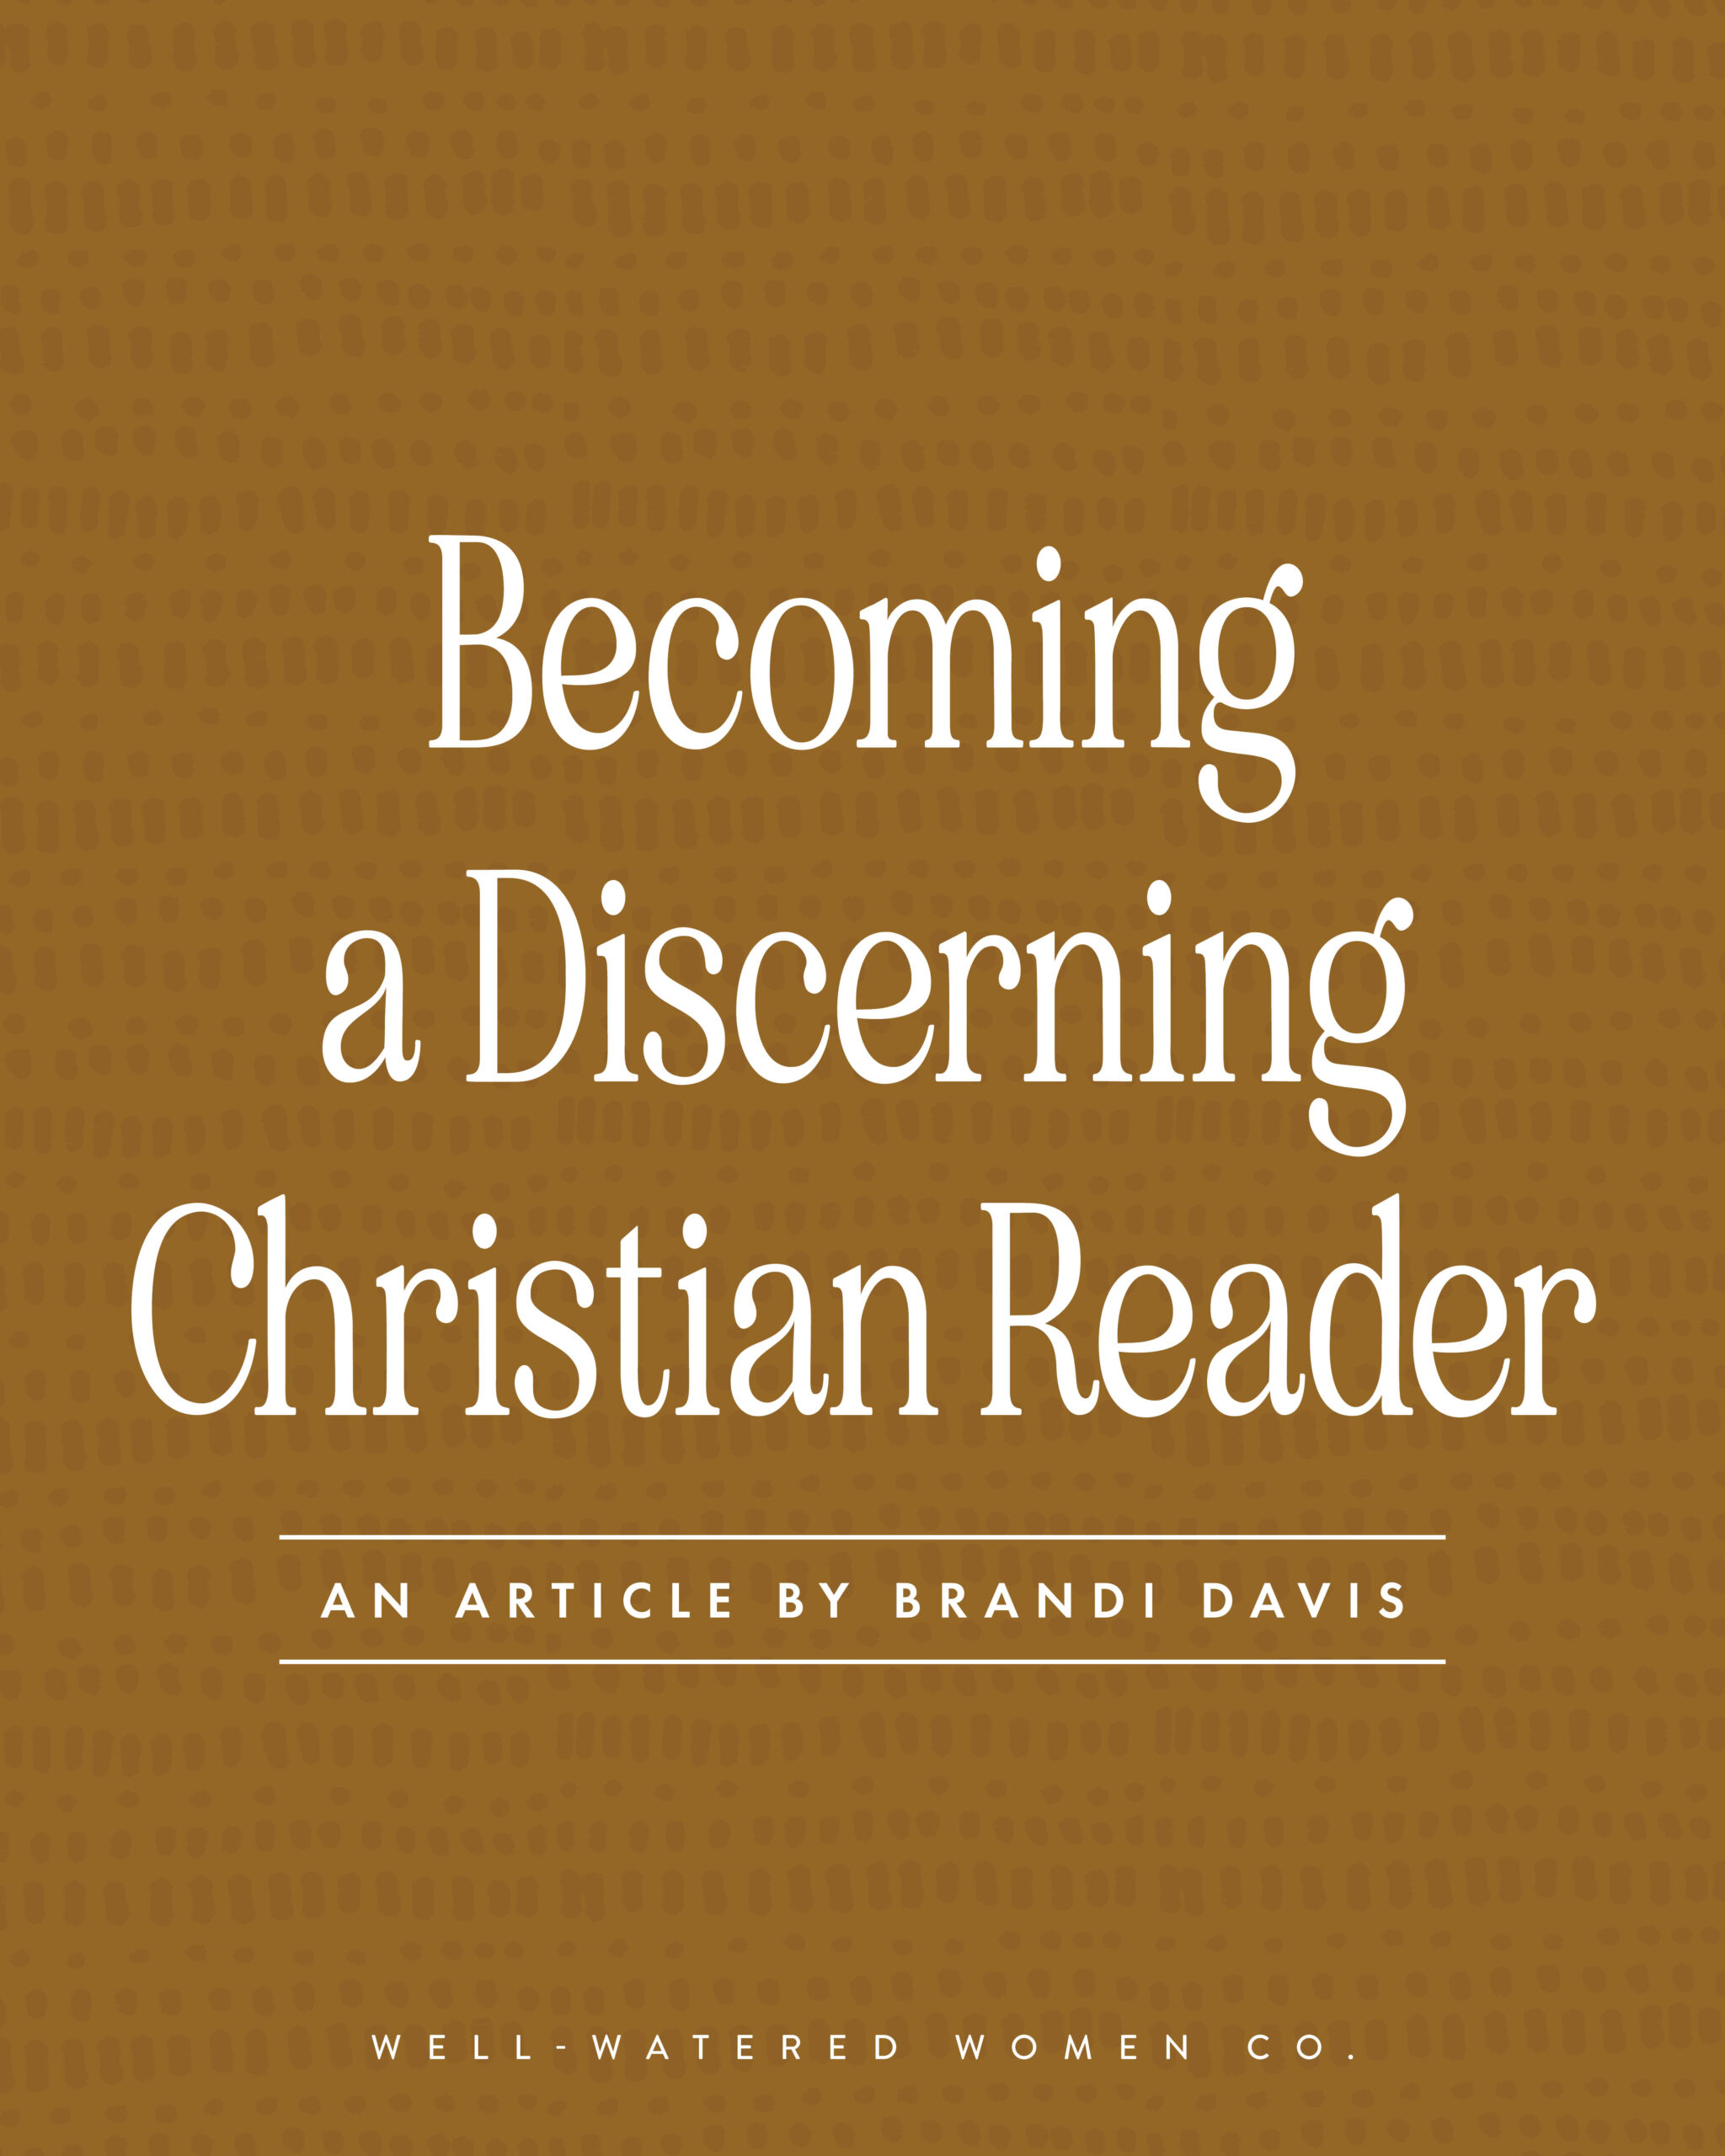 Becoming a Discerning Christian Reader - an article from Well-Watered Women